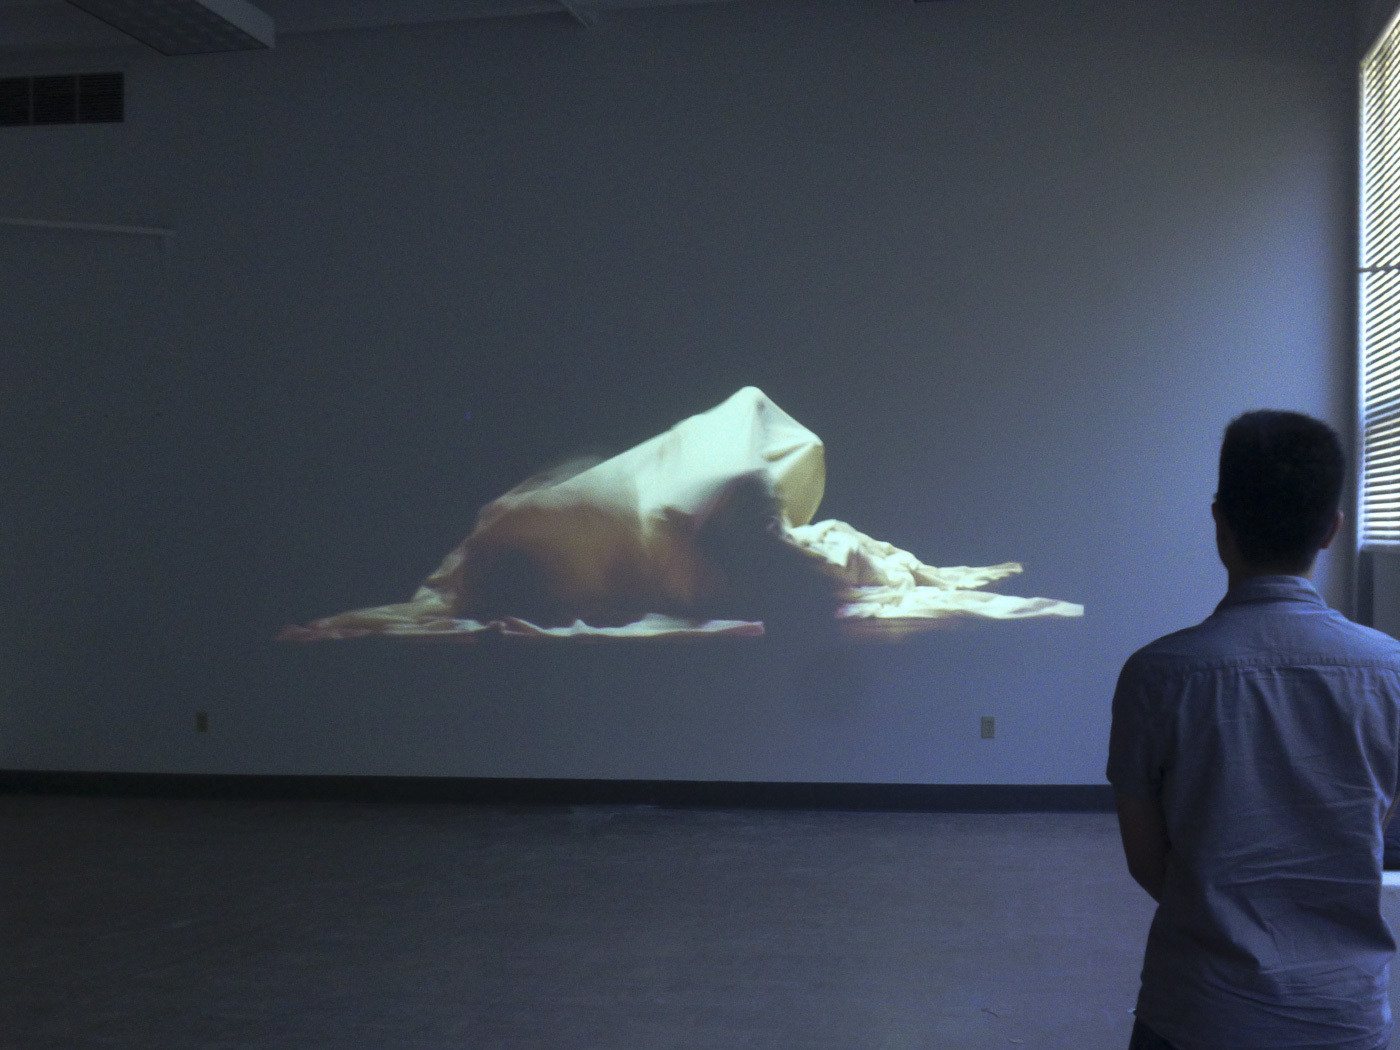 one person stands watching a video projection of an abstract fabric shape displayed on the wall of a dark empty room